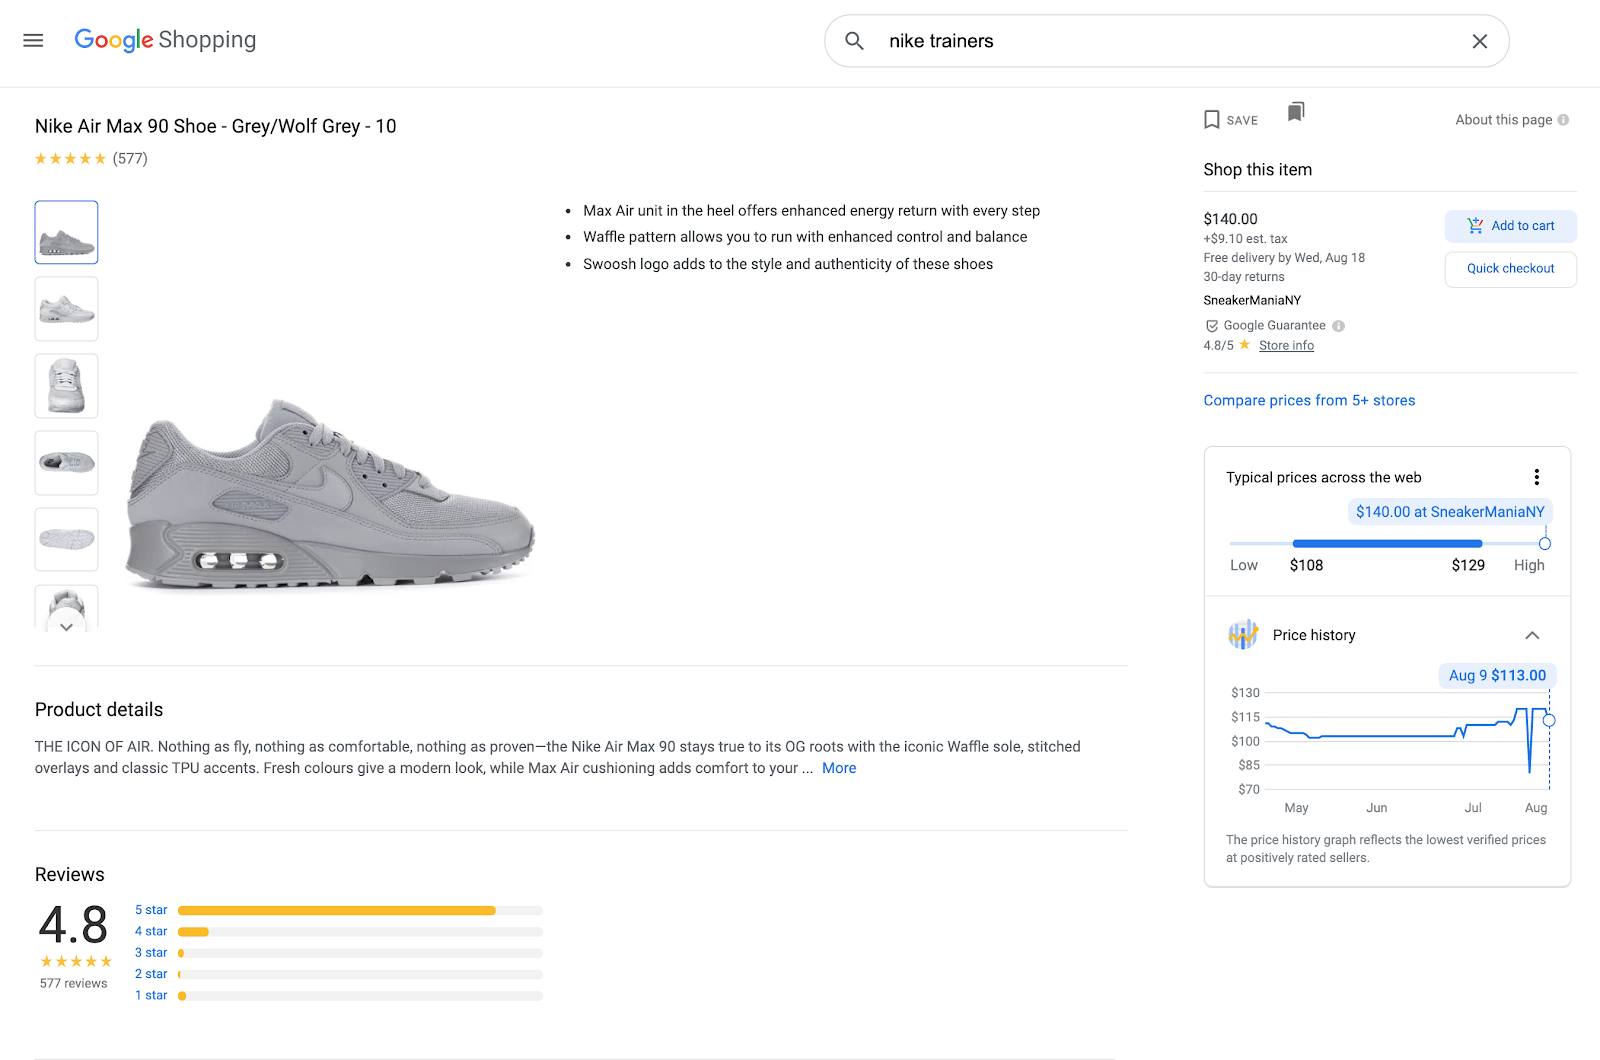 Screenshot of a Google Shopping page showing Nike Air Max shoes with the new price comparison graph on the right hand side